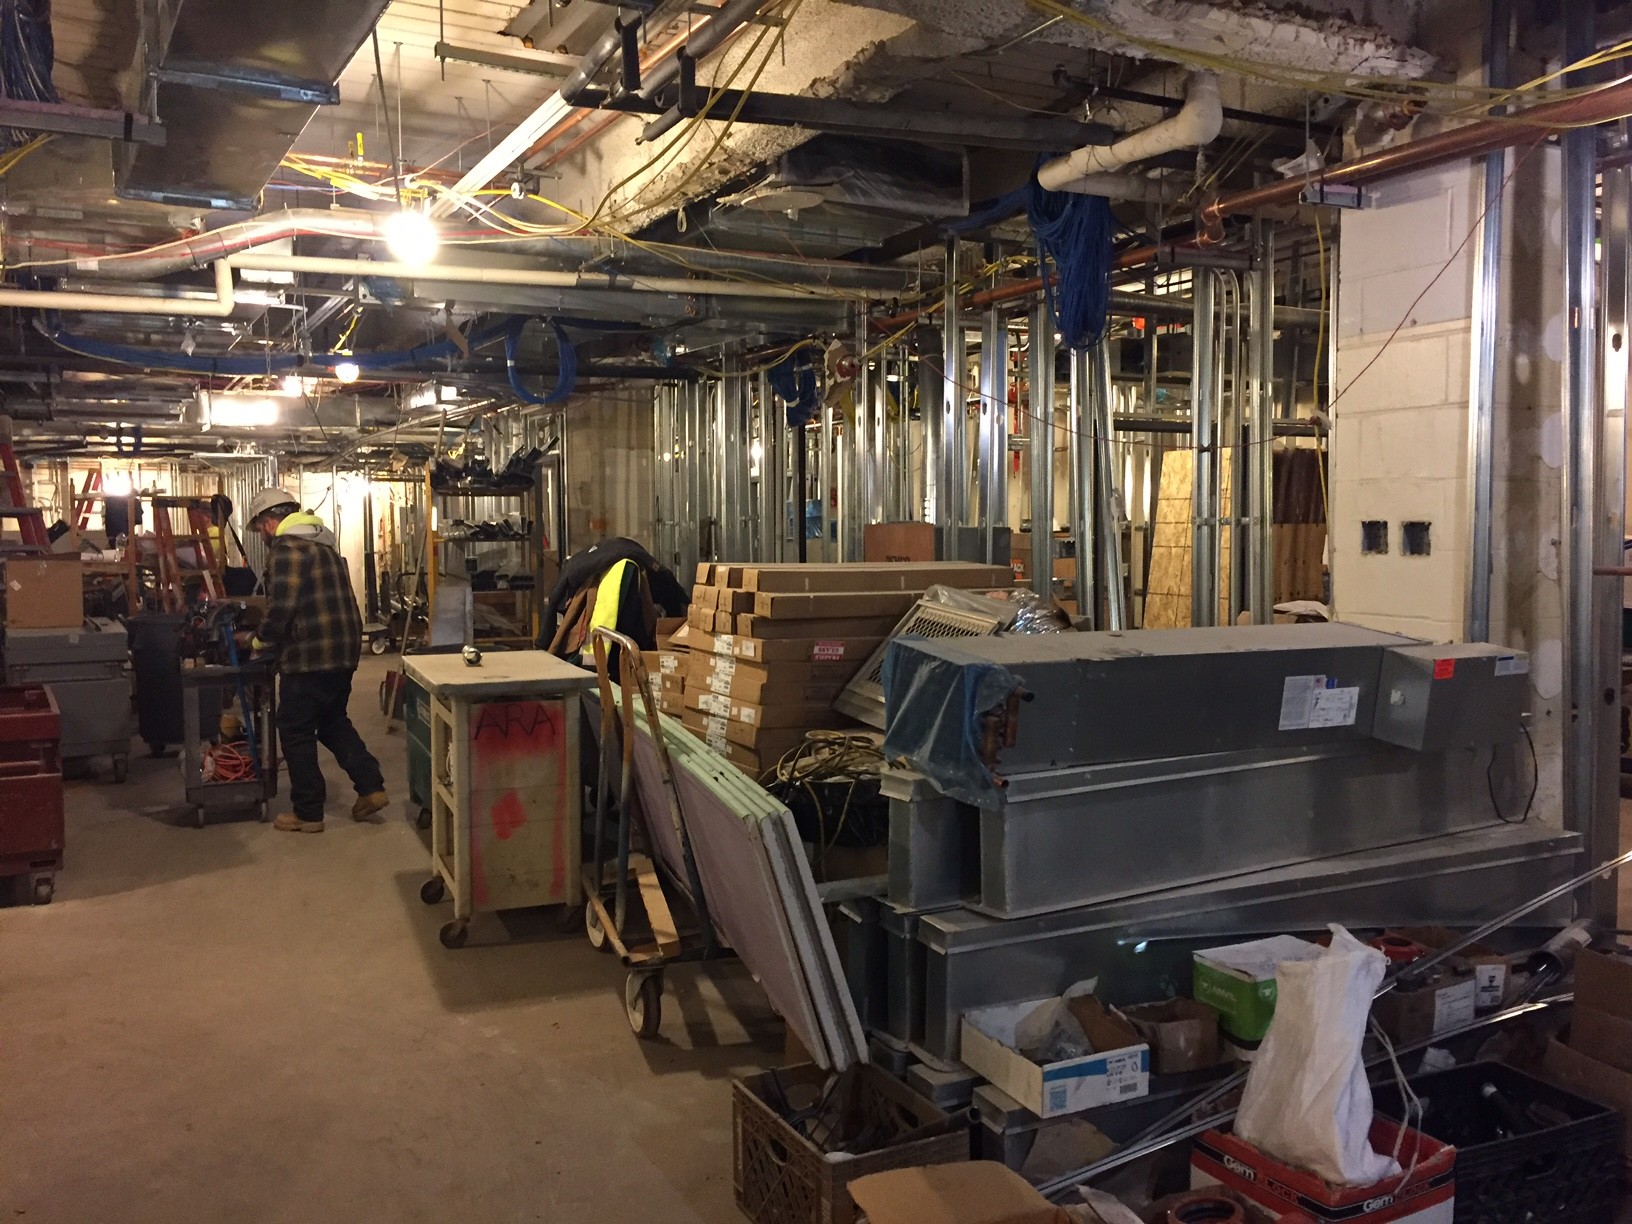 Workers are clearing a large machine room to free up 2,500 square feet for clinical space in South Nassau Communities Hospital’s emergency department.